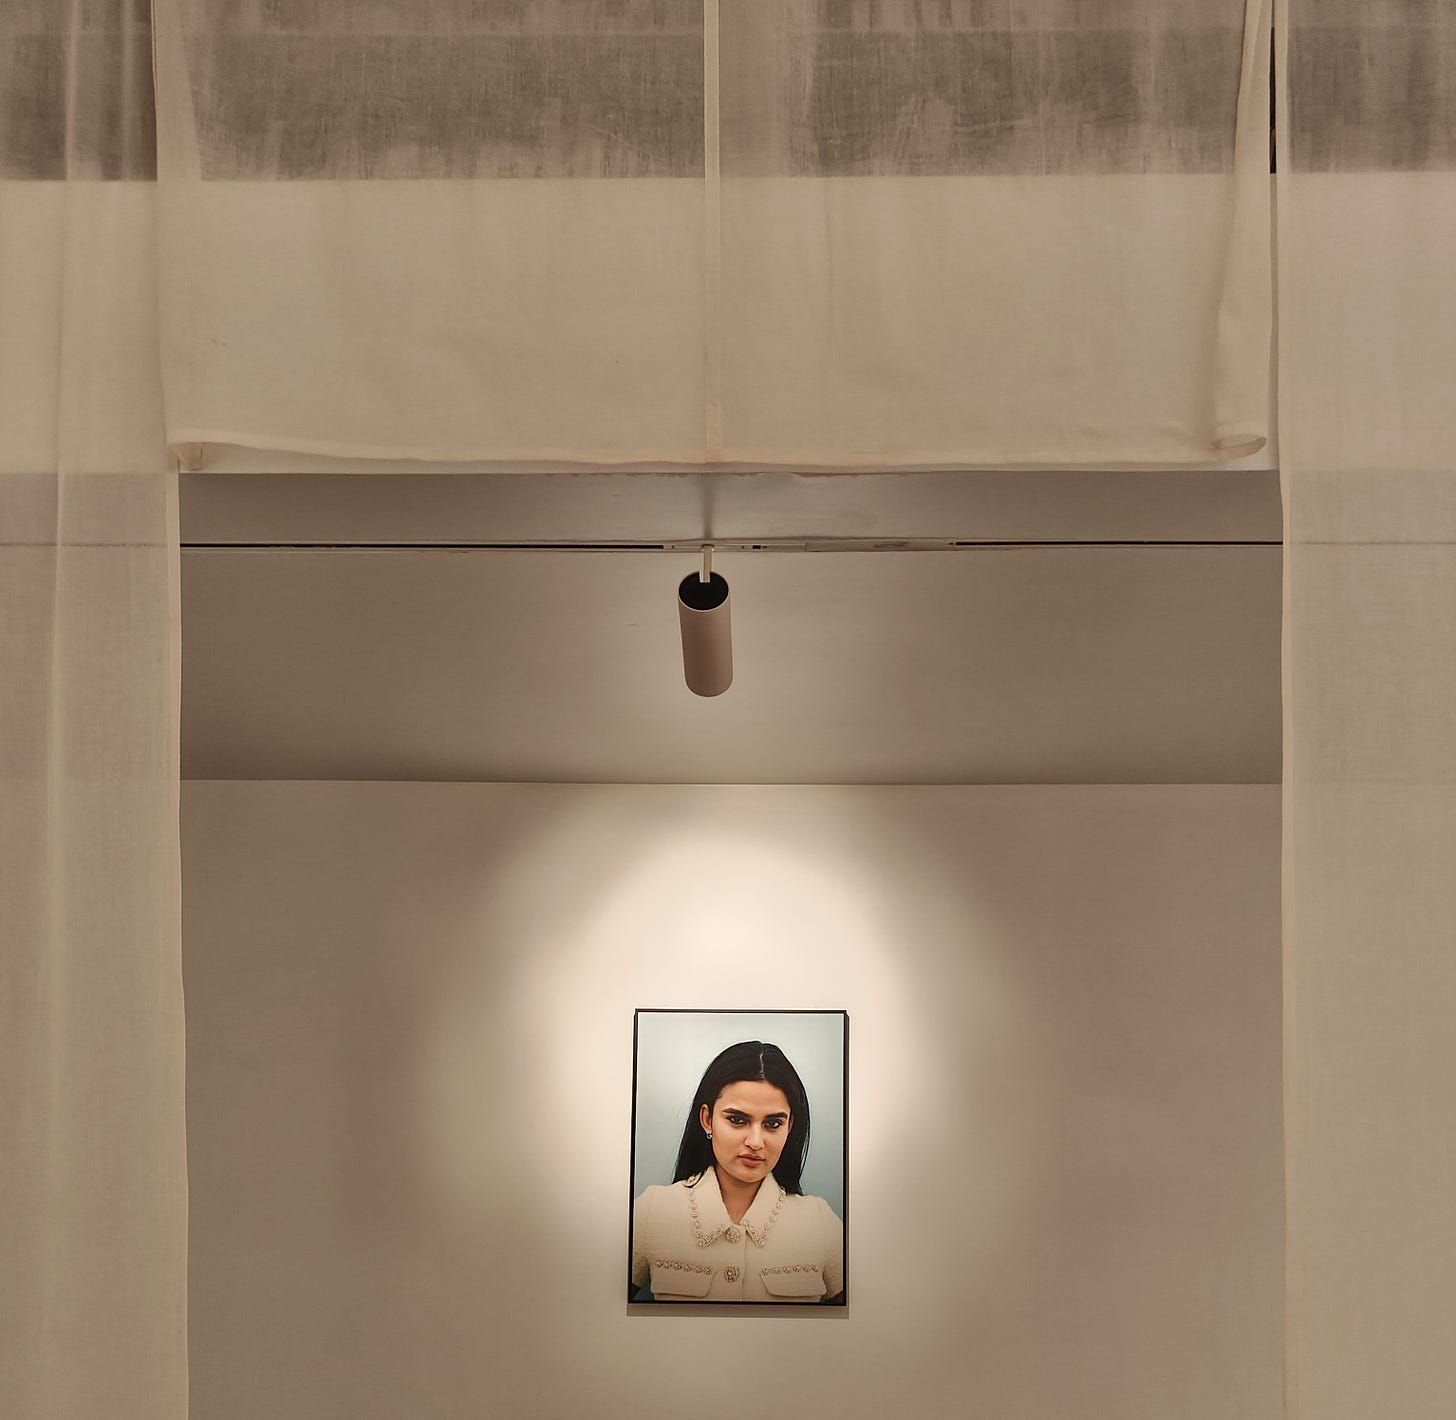 Prarthna Singh's portrait of a young woman on a white wall, spotlit and framed by white curtains.